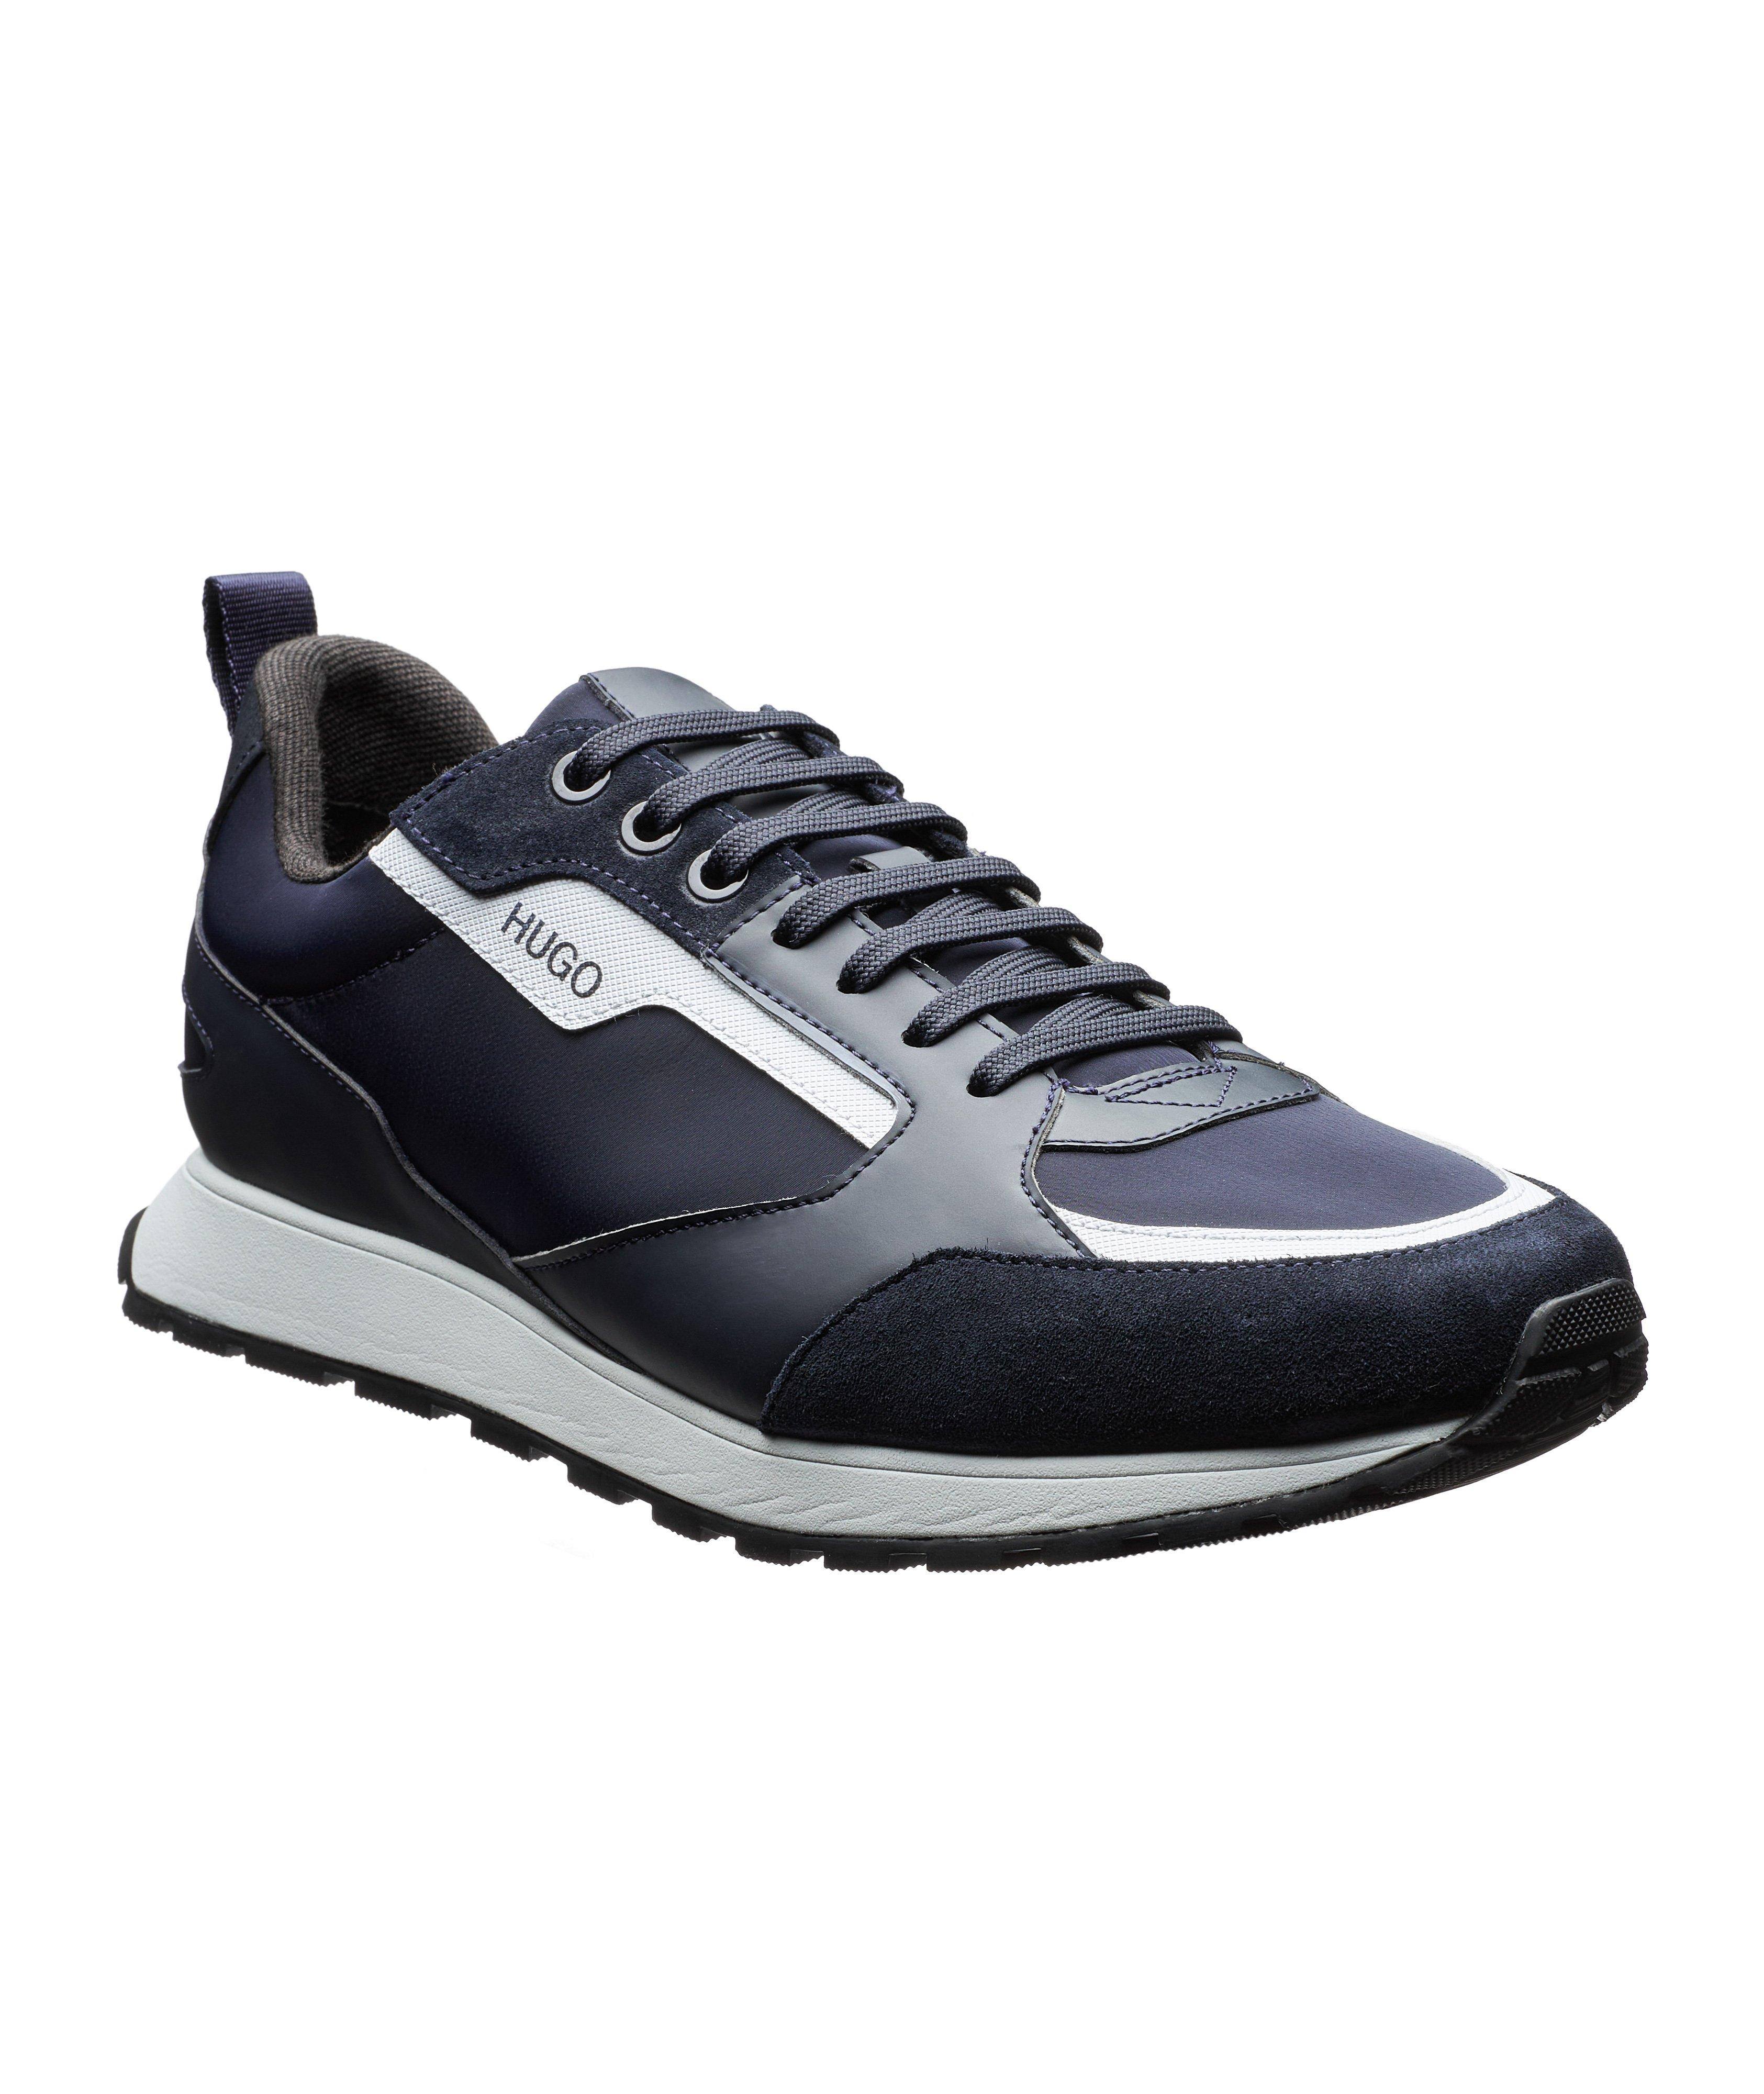 Chaussure sport Icelin image 0